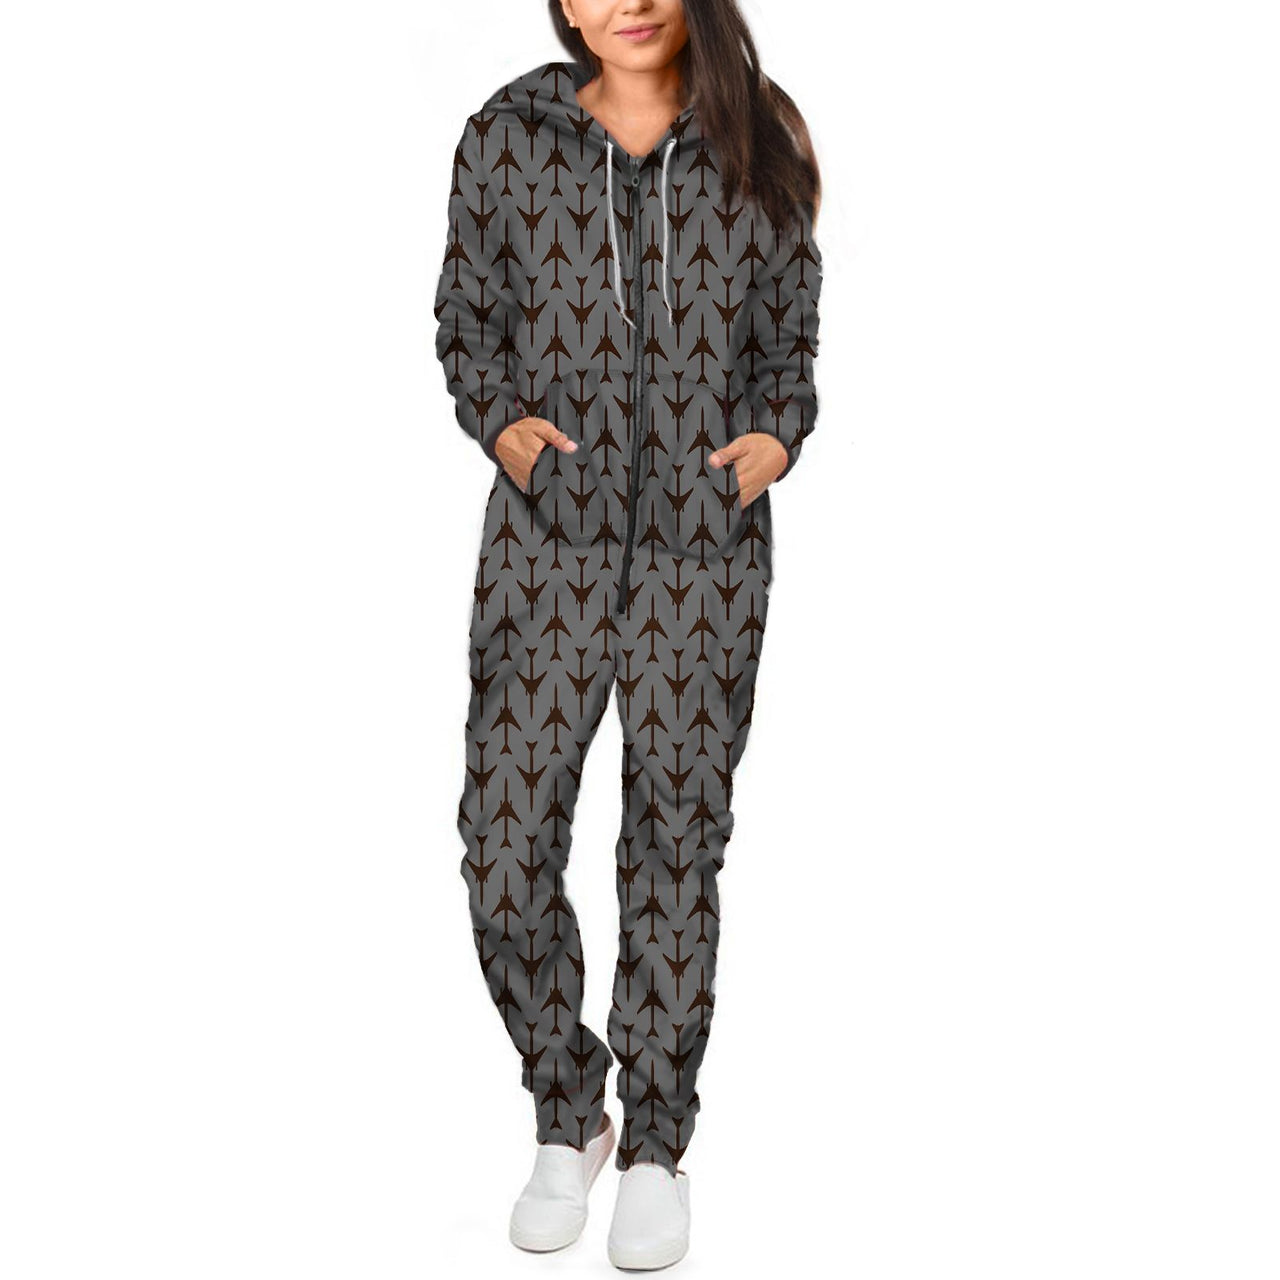 Perfectly Sized Seamless Airplanes Gray Designed Jumpsuit for Men & Women